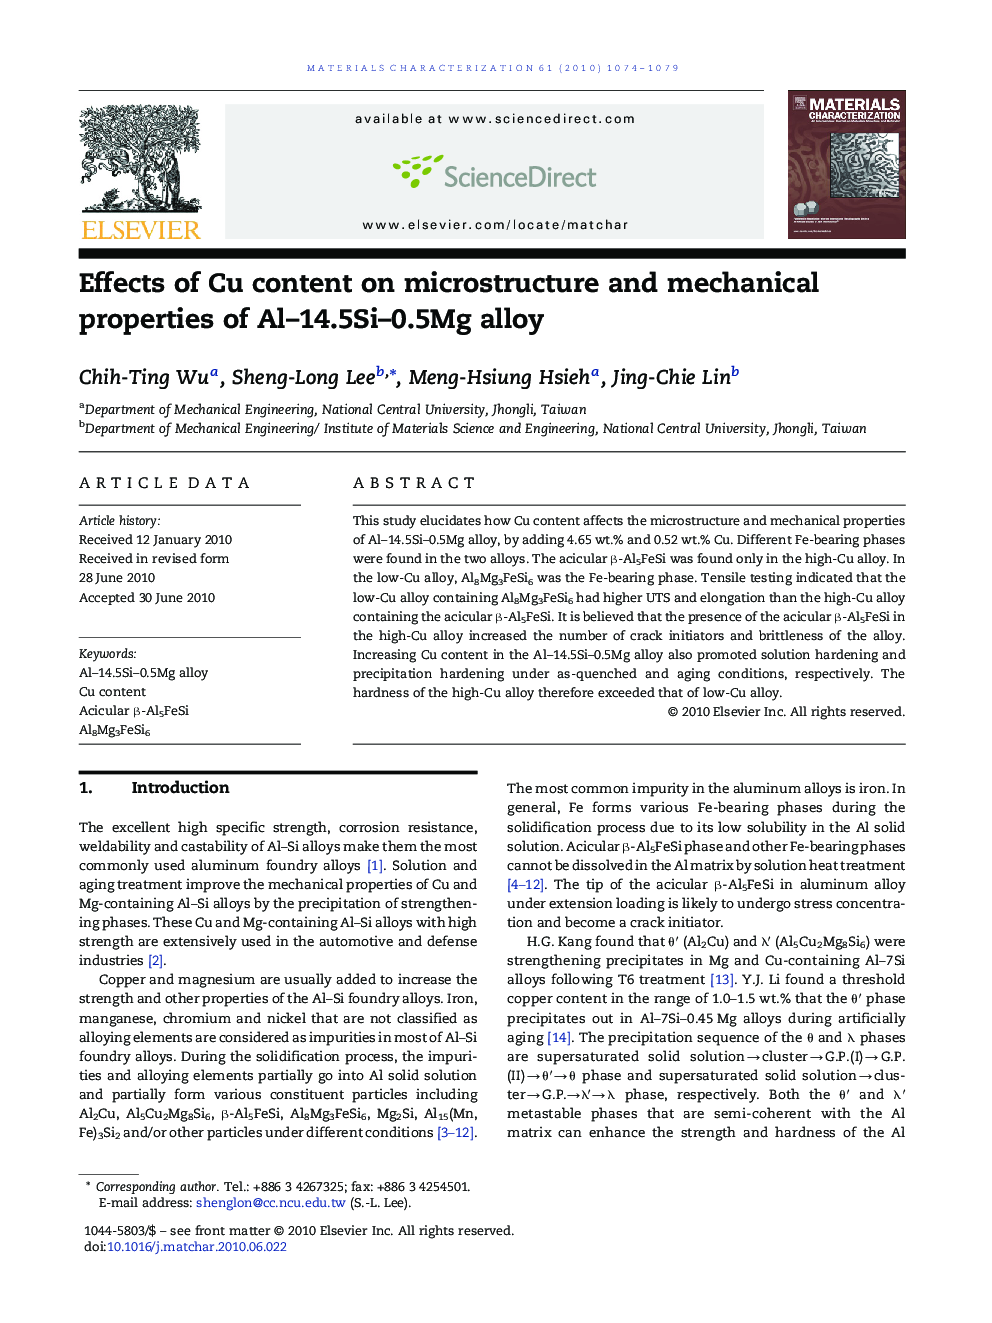 Effects of Cu content on microstructure and mechanical properties of Al-14.5Si-0.5Mg alloy